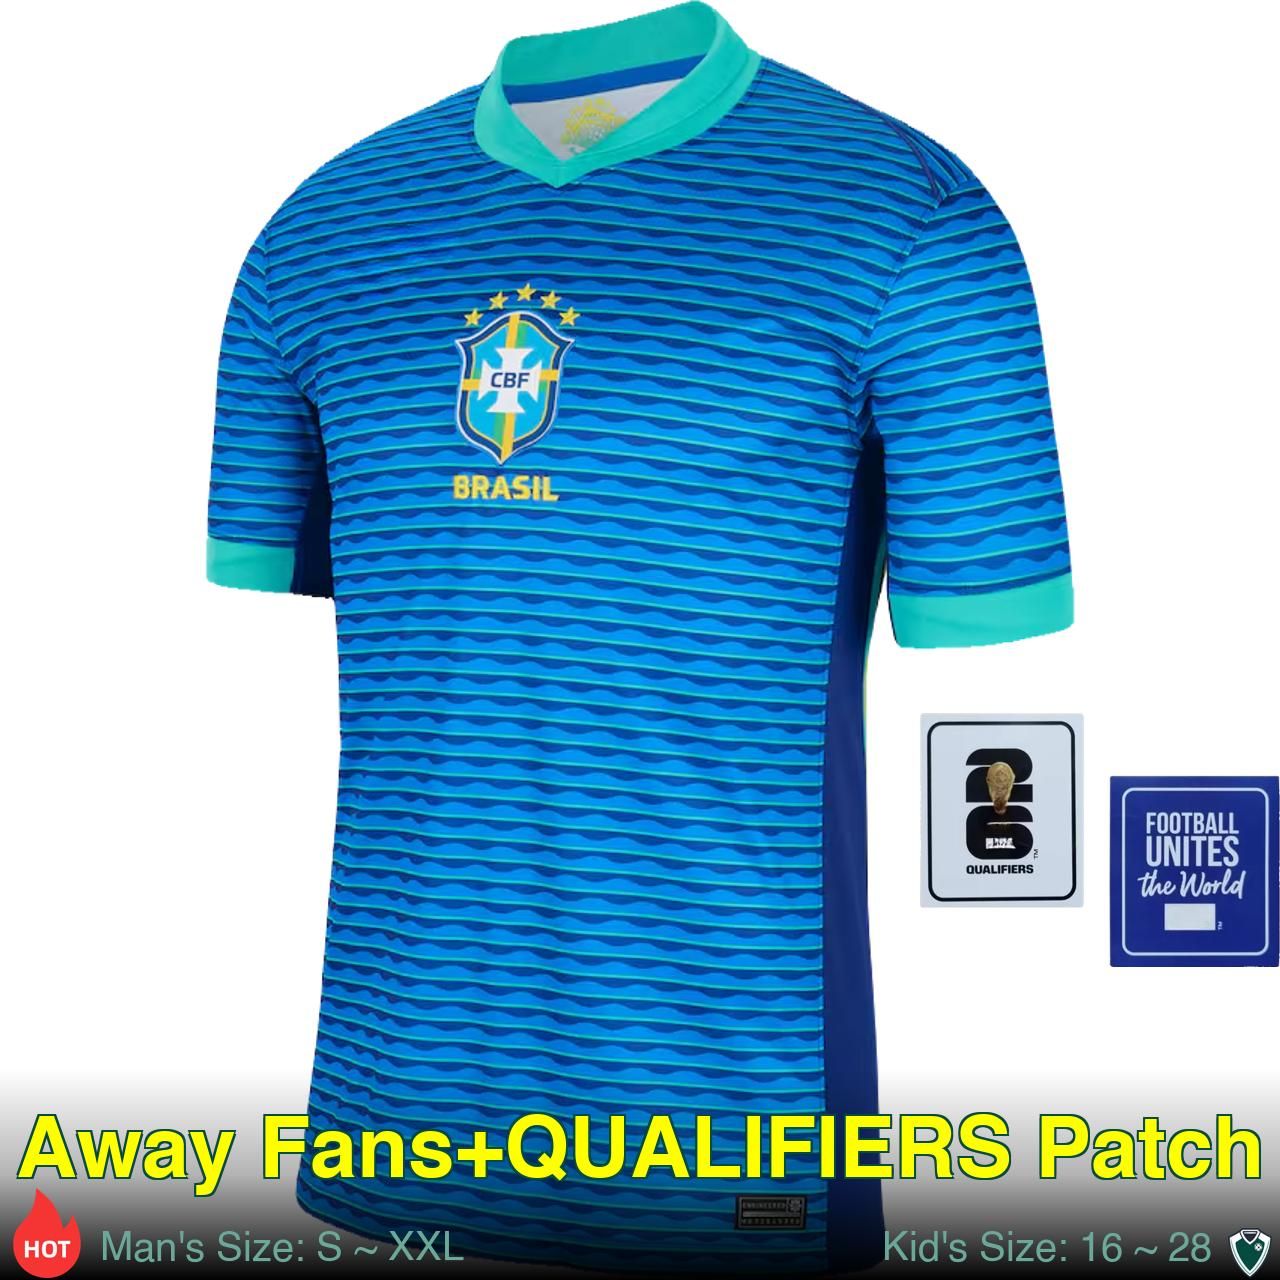 Away Fans+QUALIFIERS Patch